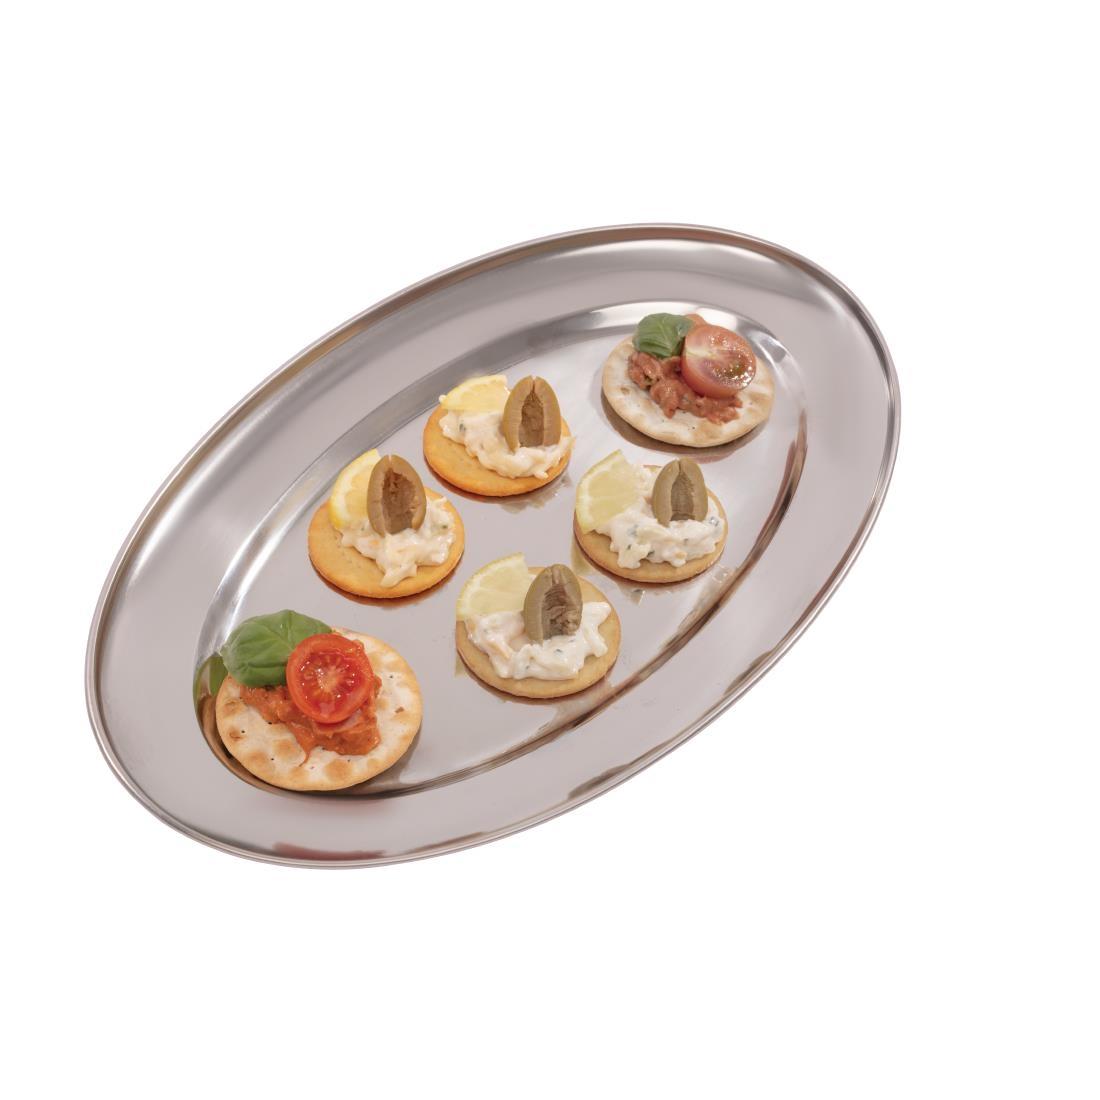 Olympia Stainless Steel Oval Serving Tray 350mm - K364  - 4